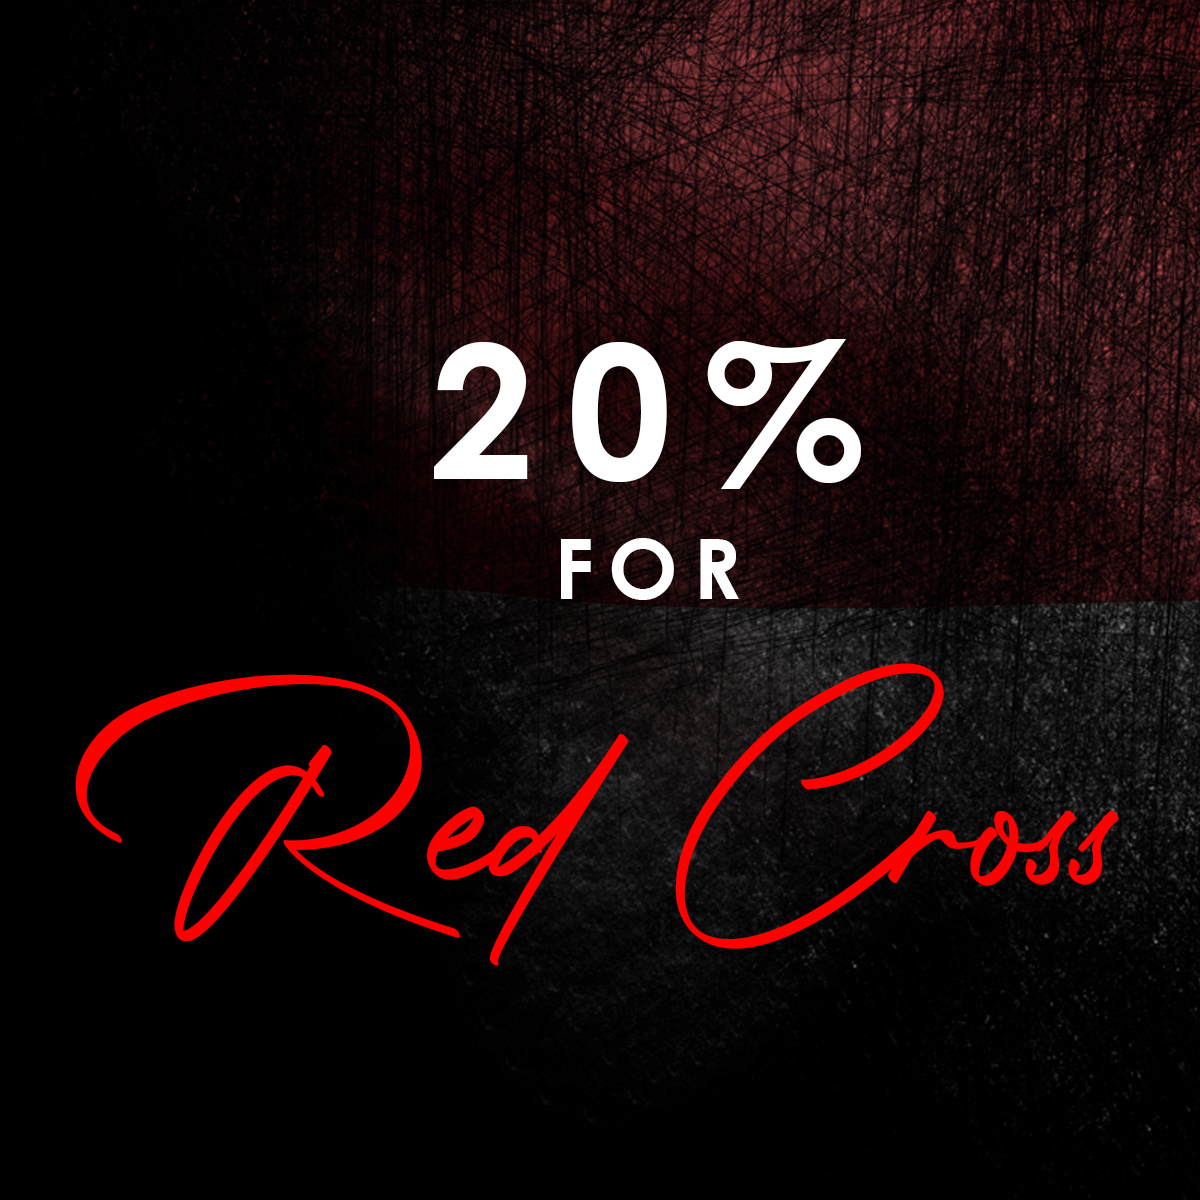 20% of all our income of the Lebanon bow tie will go directly to the RED CROSS in Lebanon.
#classydress #classyshoes #classyasfuck #classyinterior #classywears #classybowties #classywear #classychic #classyandsassy #classypeople #classyandfabulous #classylebanese #classyjewelry